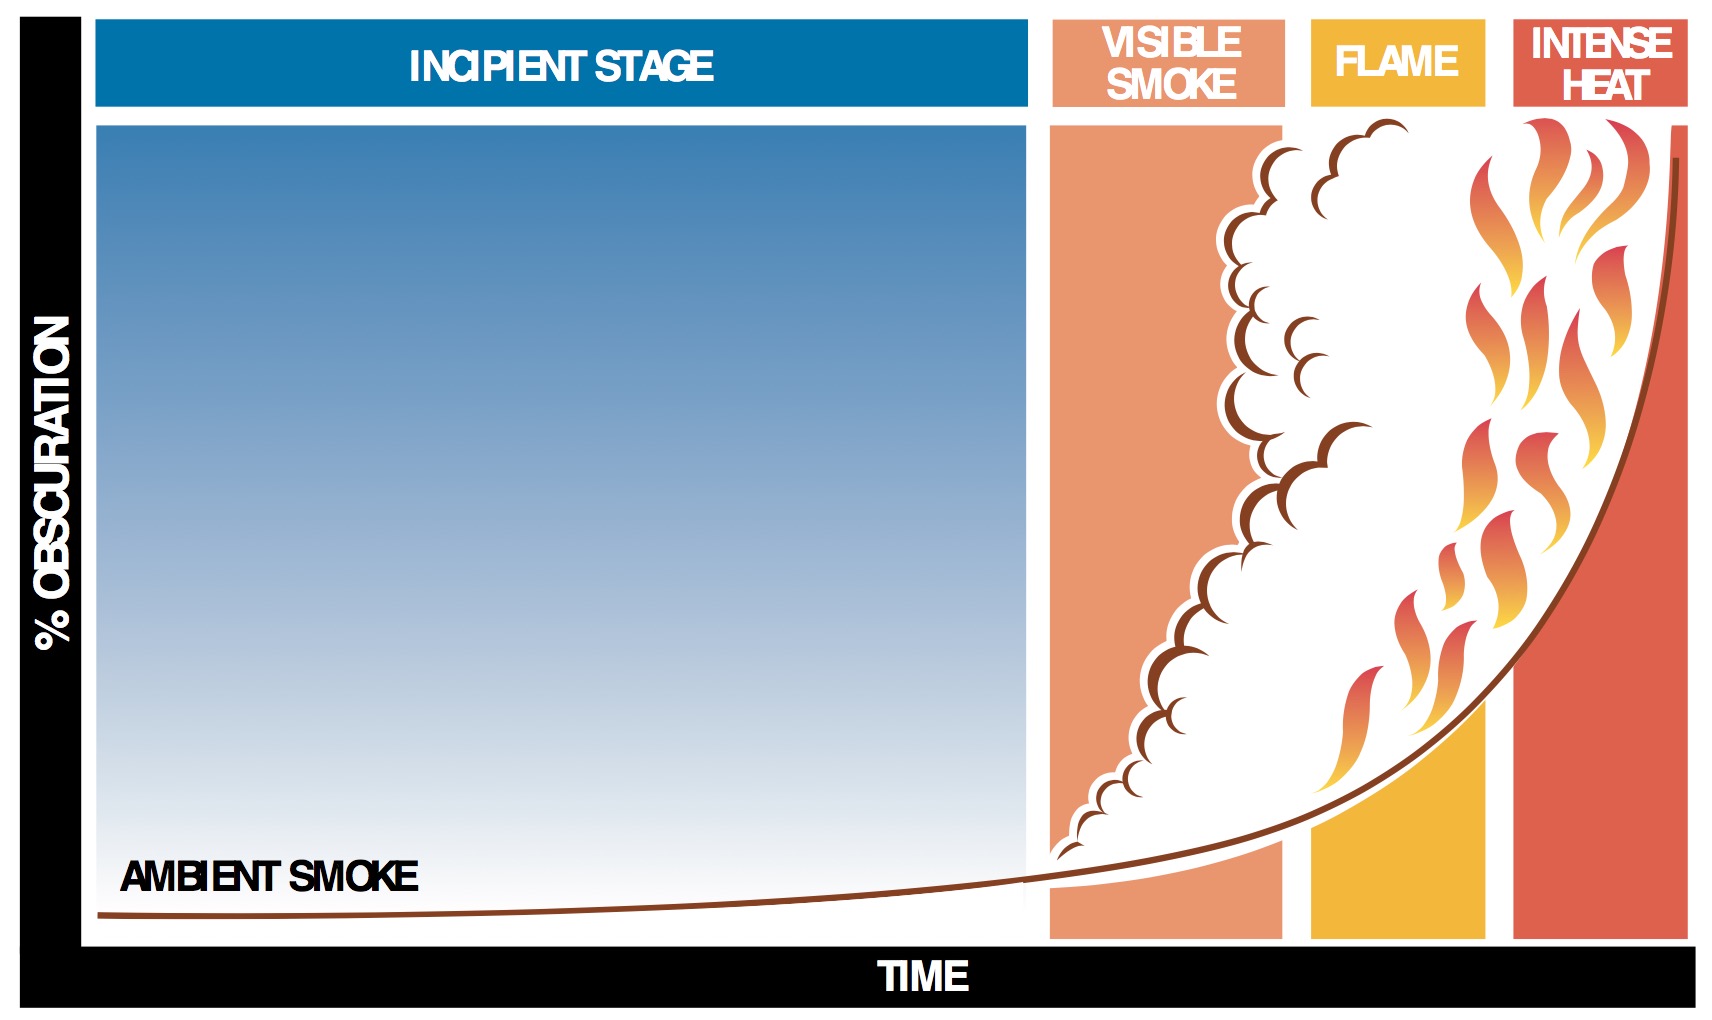 Graphic showing the incipent stage of a fire